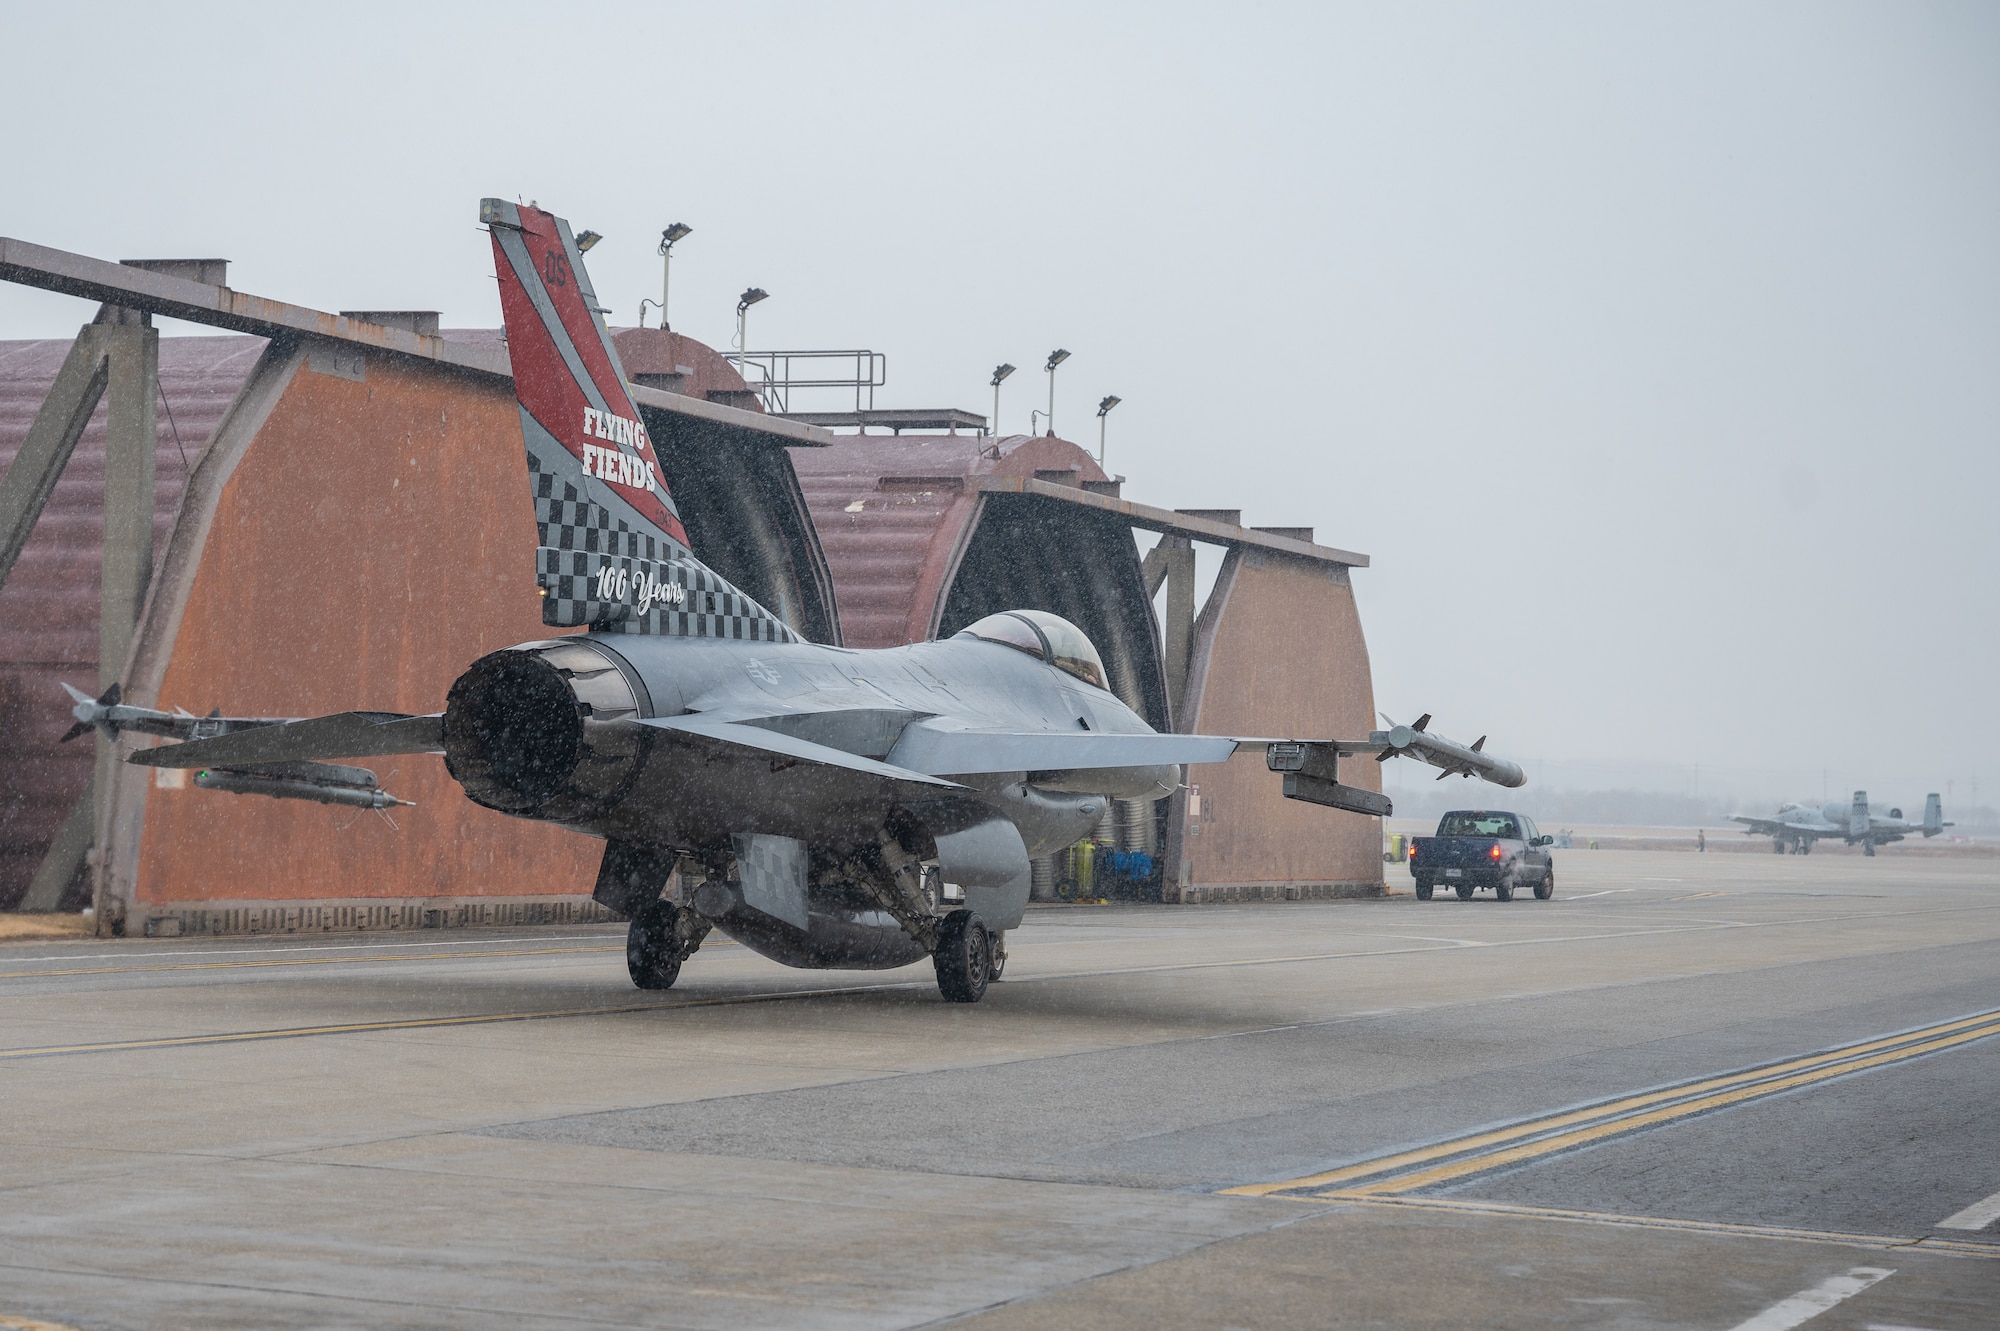 A U.S. Air Force F-16 Fighting Falcon prepares to taxi a runway at Osan Air Base, Republic of Korea, Jan. 9, 2024. The F-16 has been a crucial part of the 36th Fighter Squadron since its adoption in 1993, and training with it allows pilots to continue being ready to encounter any potential threats. (U.S. Air Force photo by Airman 1st Class Chase Verzaal)